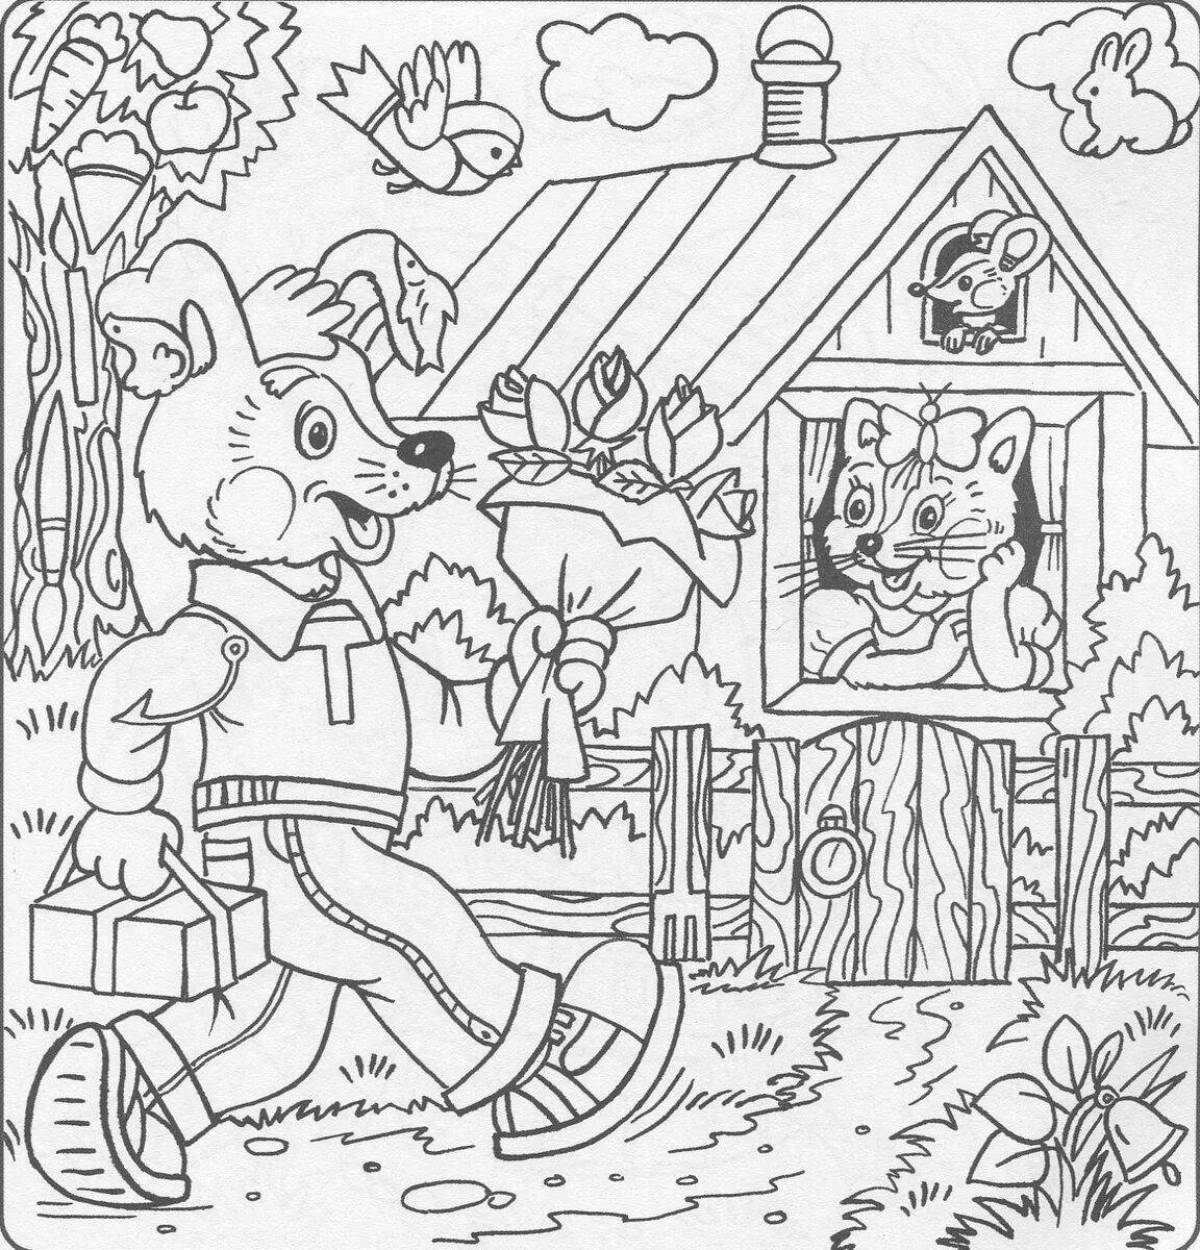 A fun coloring book for kids 7-8 years old